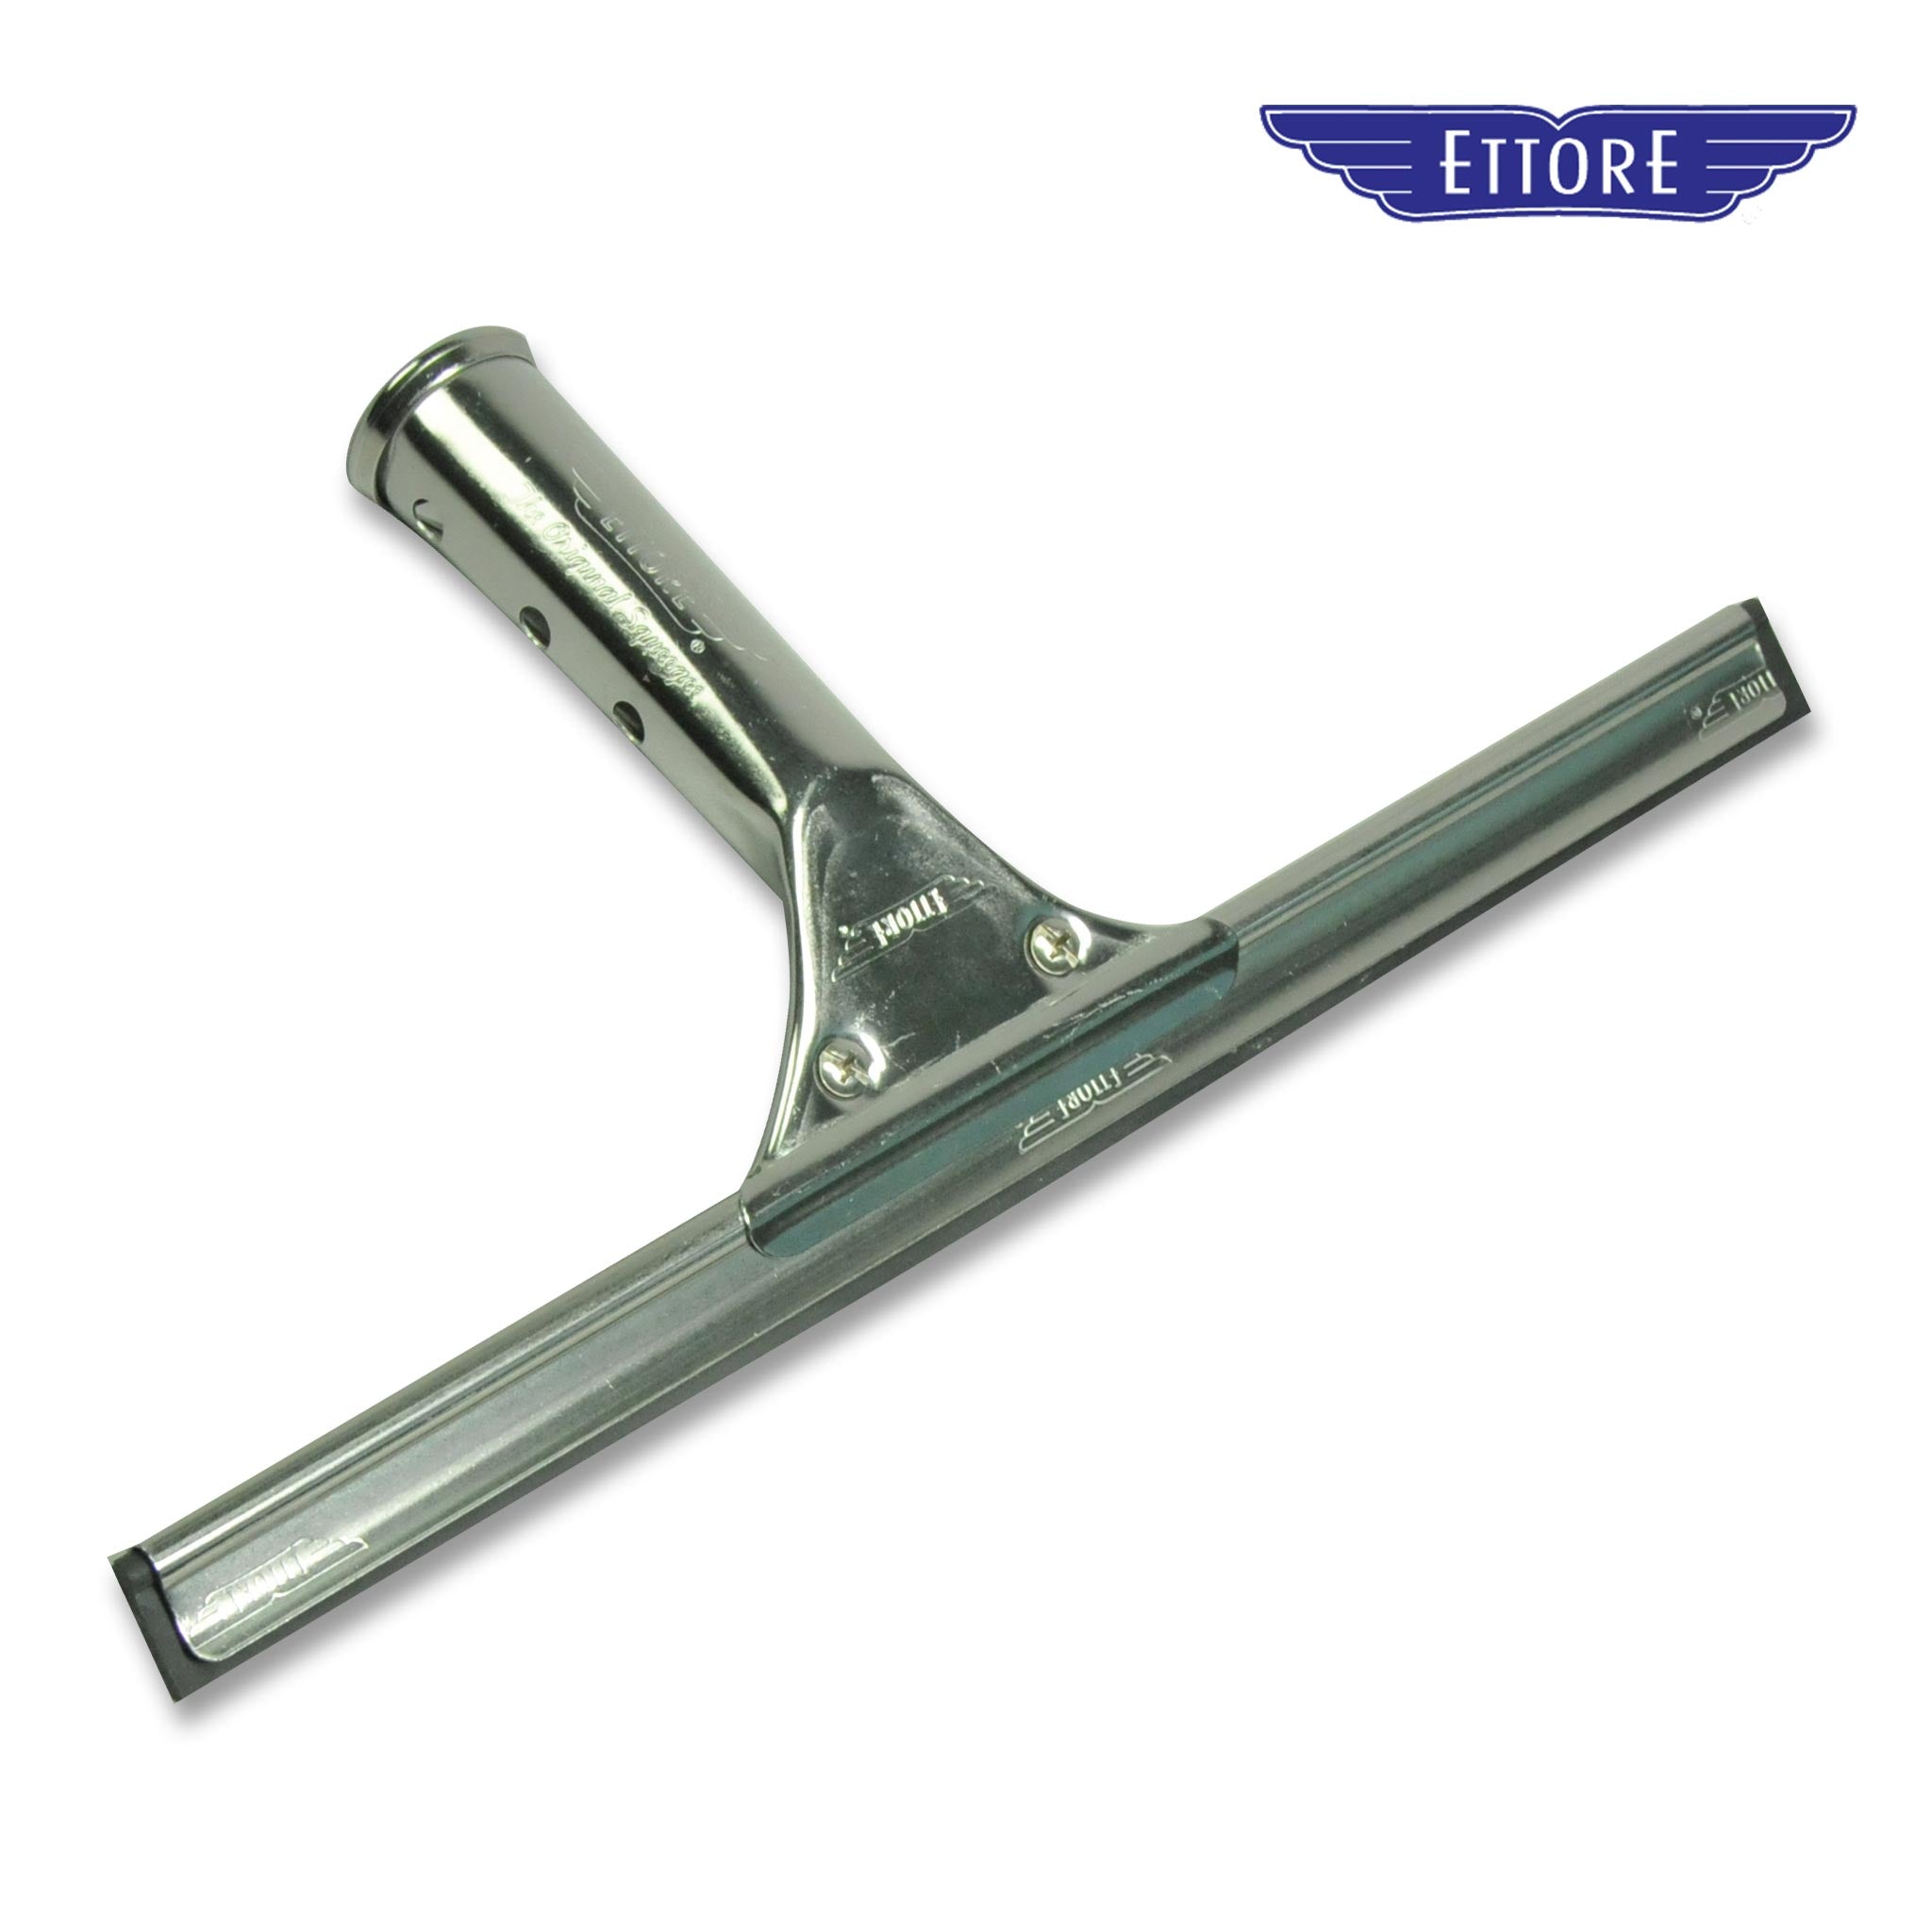 Ettore Master Stainless Steel Squeegee